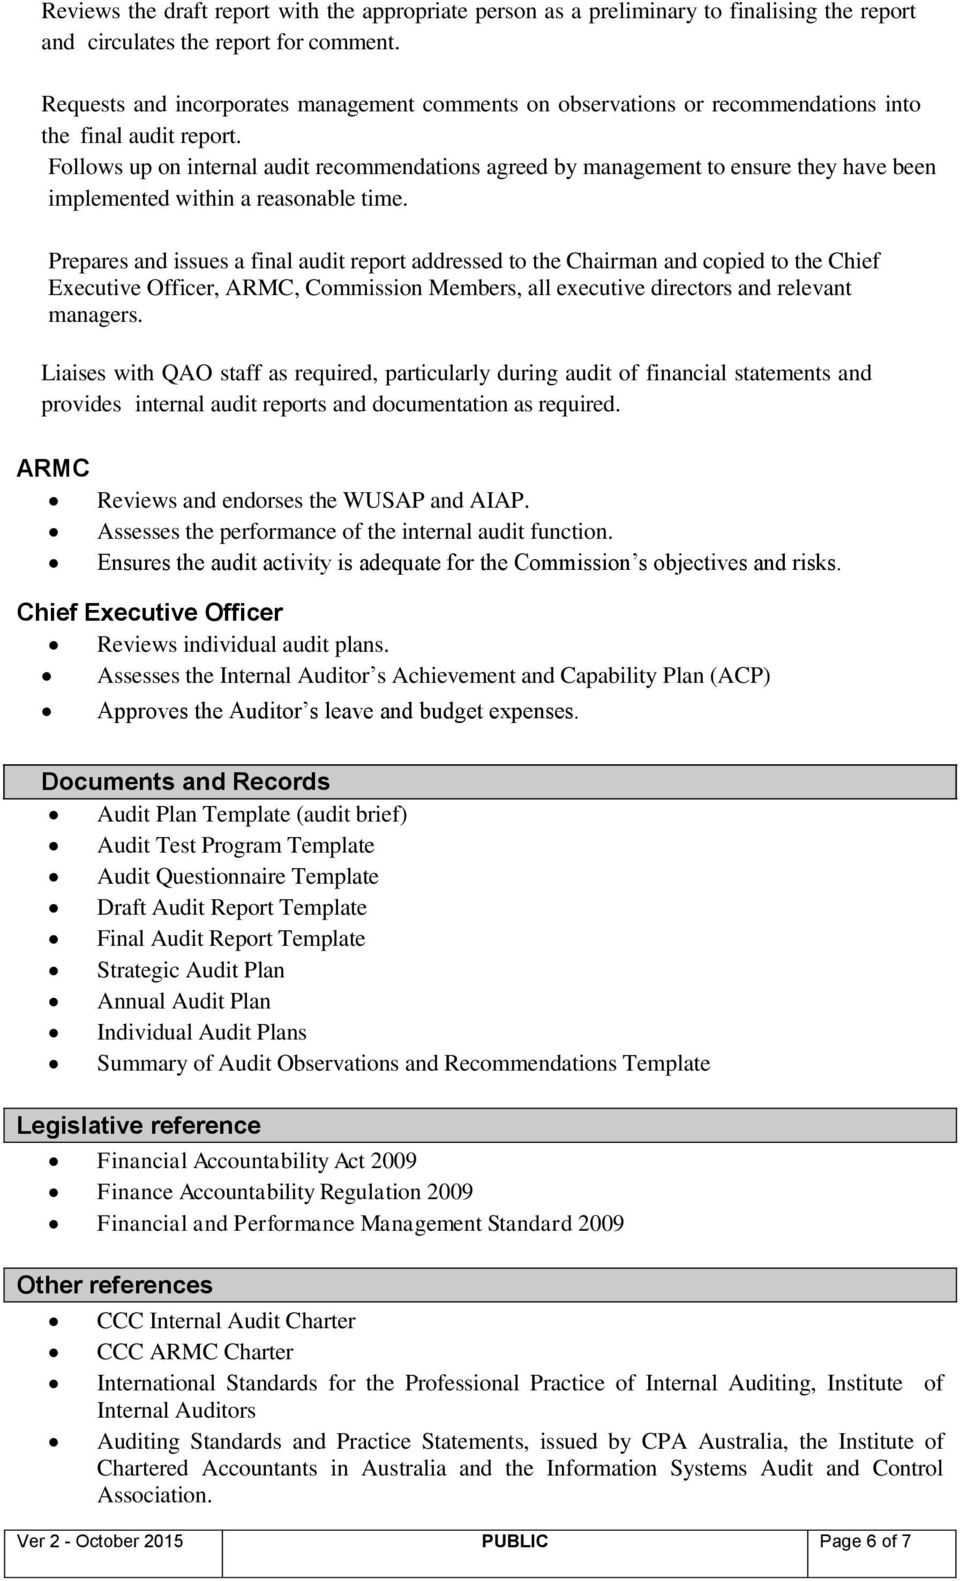 Sample Internal Audit Report Executive Summary In Strategic Management Report Template